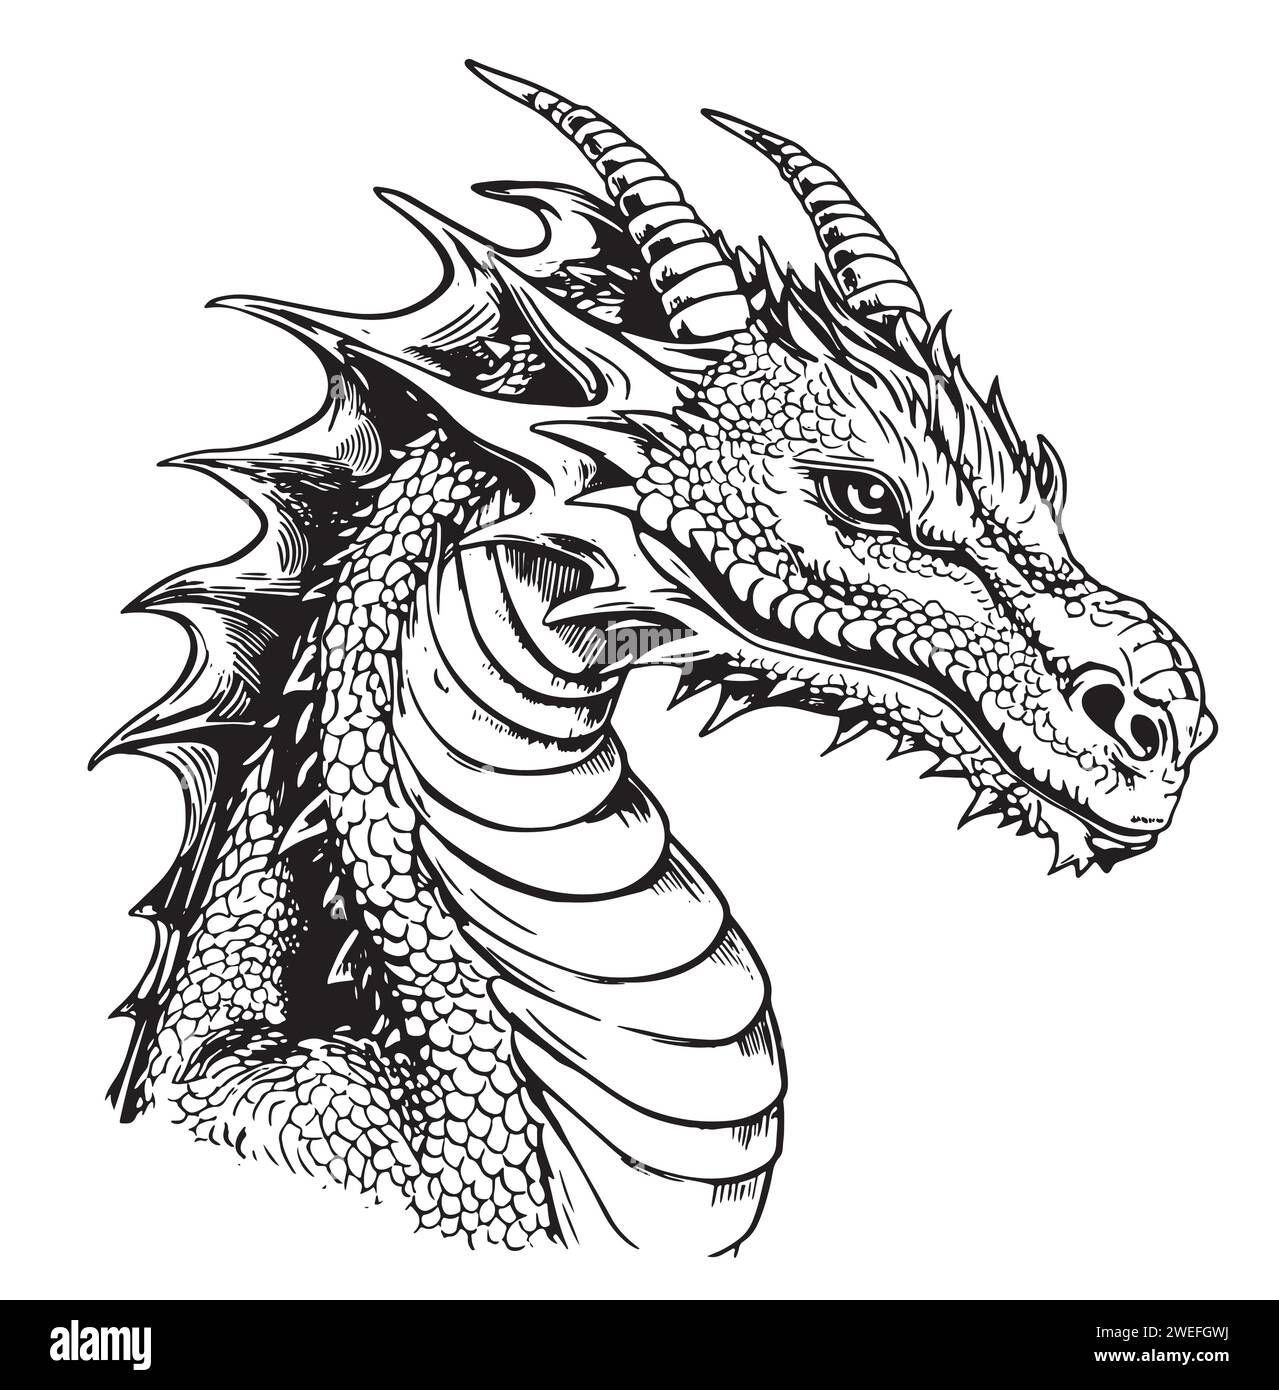 Hand Drawn Engraving Pen and Ink Dragon Head Vintage Vector Illustration Stock Vector